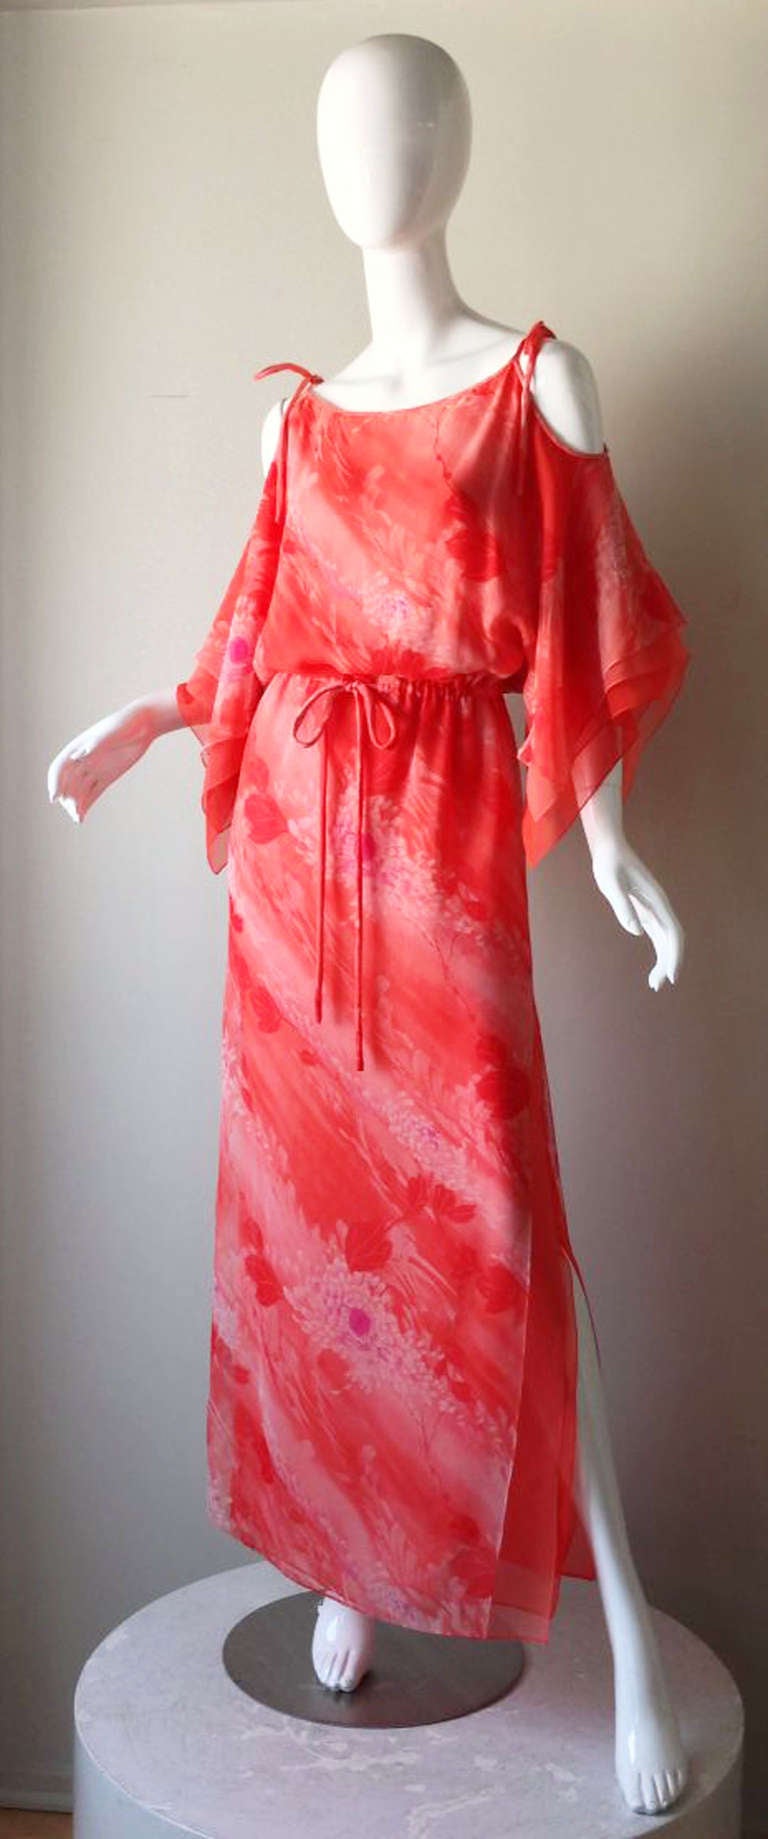 A fine vintage Travilla chiffon print gown. Triple level chiffon item features a floral print outer layer, handkerchief hems and sleeves, exposed shoulders and deep side vents. Built-in matching fabric shoulder and waist ties. Pristine, appears